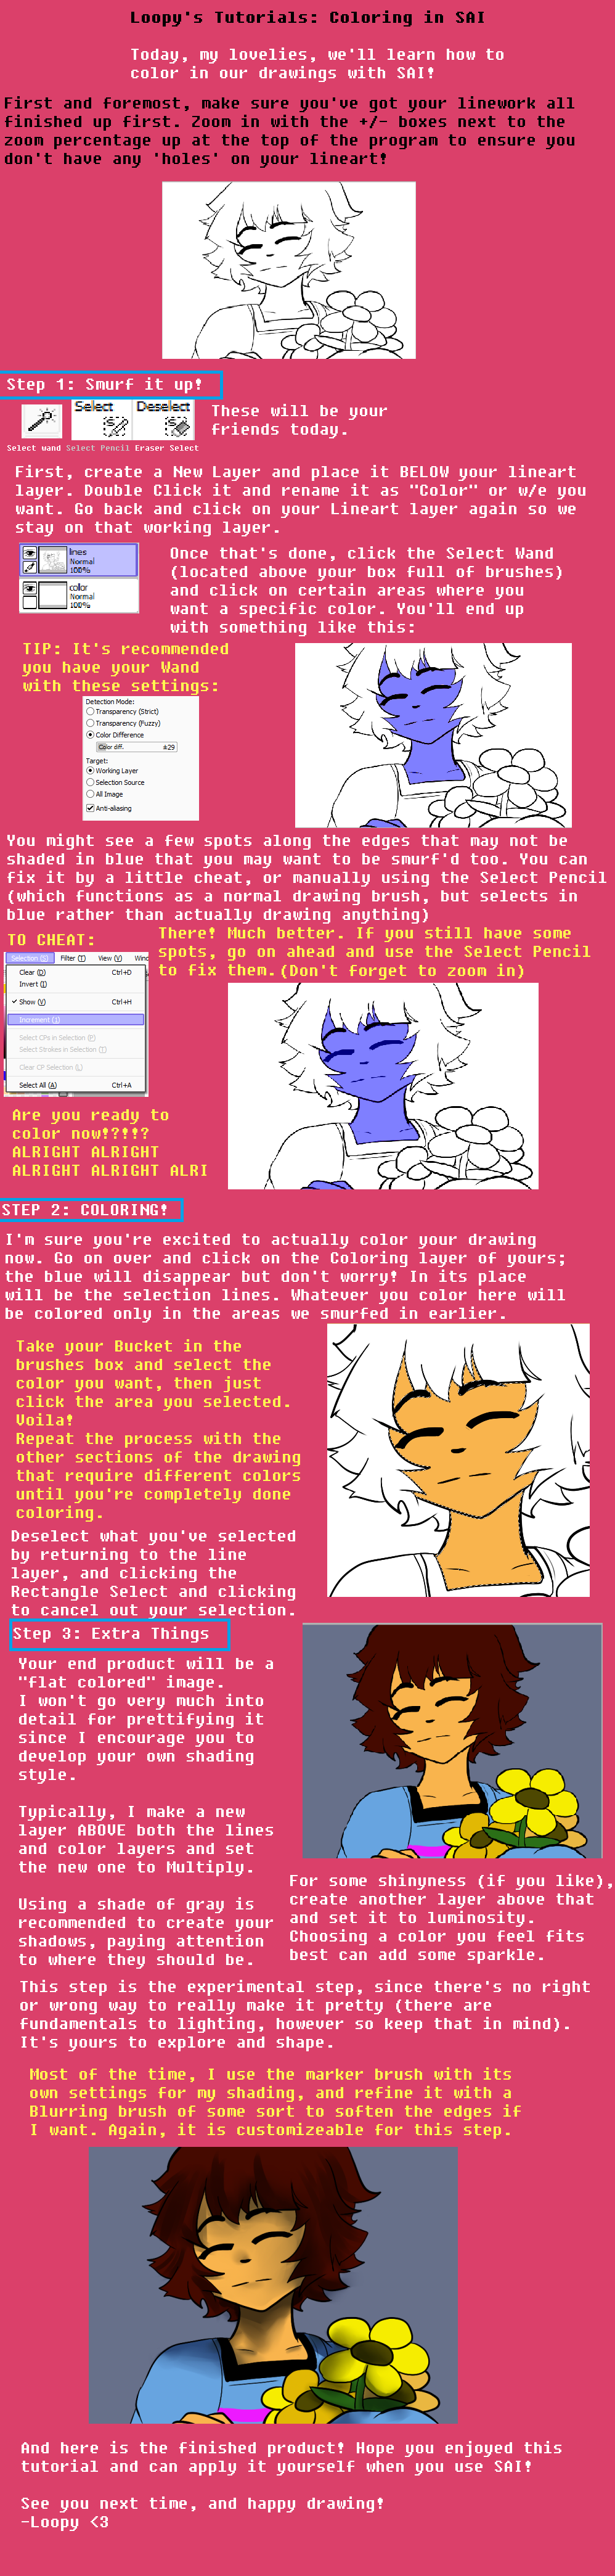 coloring_tutorial_by_loopypanda-d9i1xx3.png